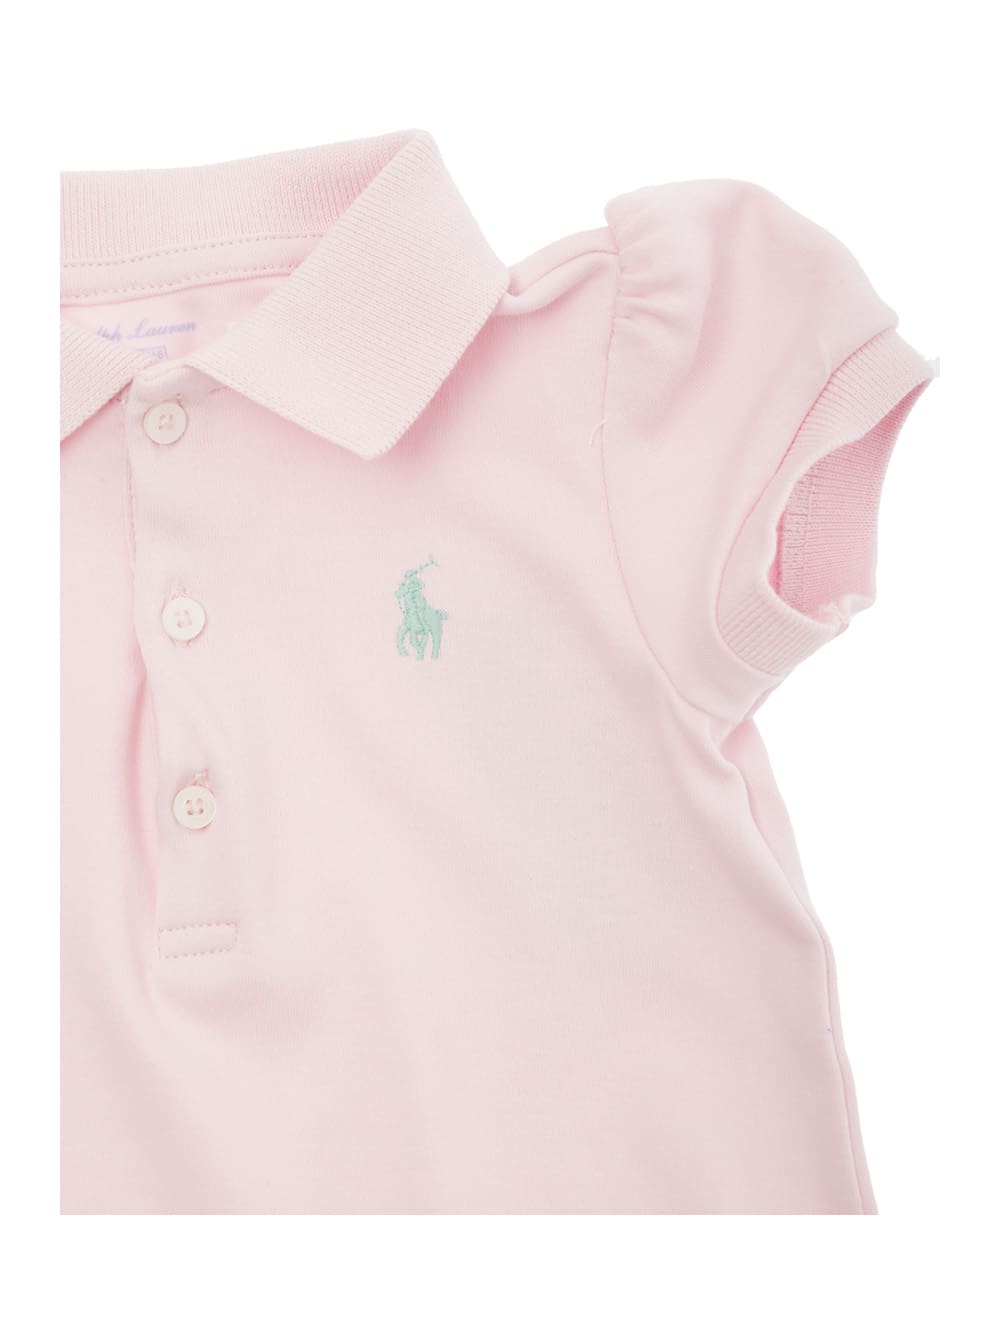 Shop Polo Ralph Lauren Pink Dress With Embroidered Pony In Cotton Baby